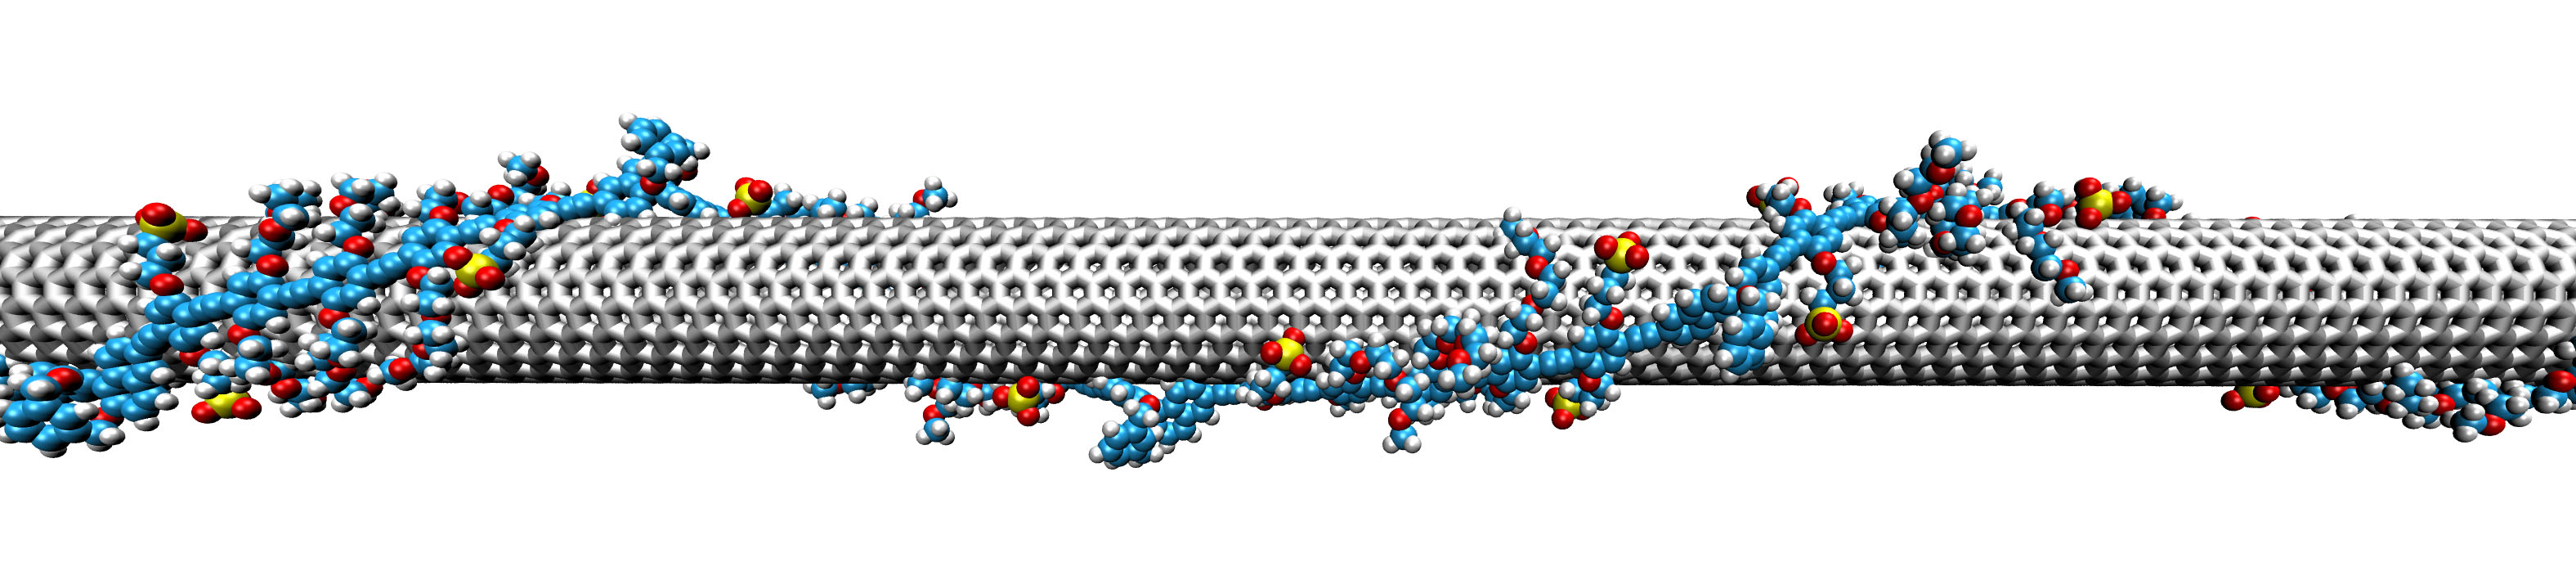 wrapping a carbon nanotube with a ribbon-like polymer